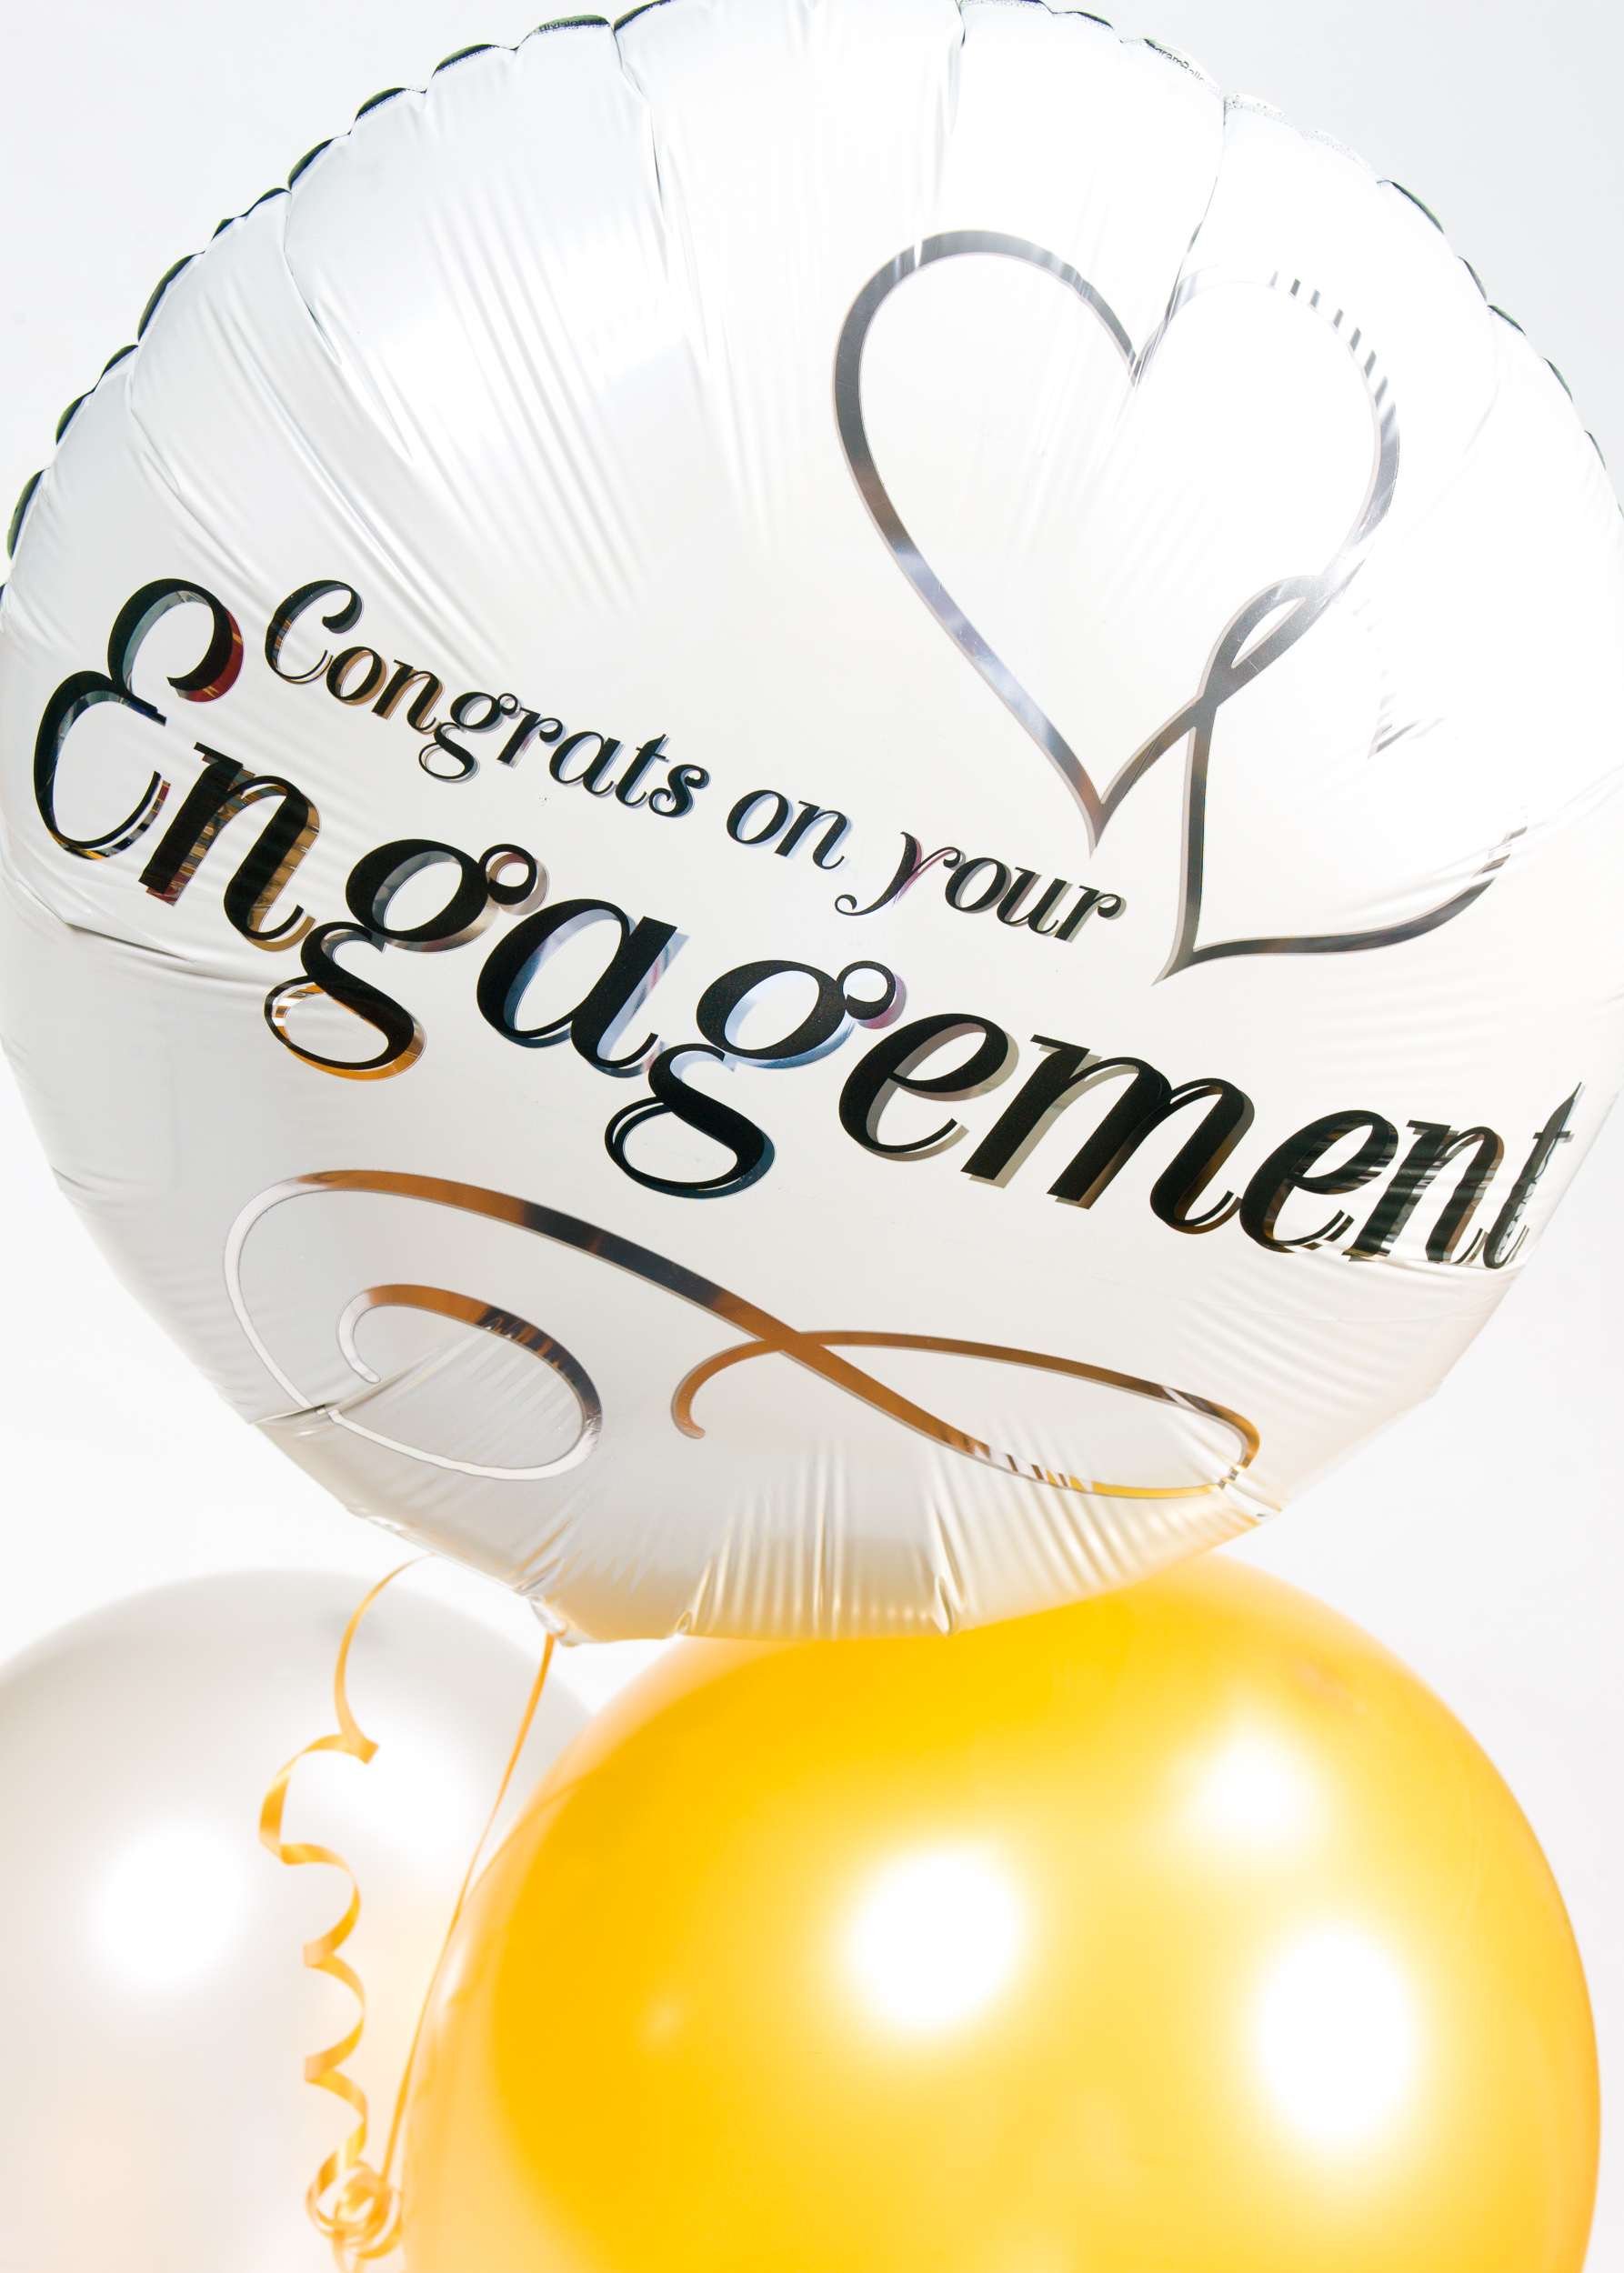 Engagement balloons delivered